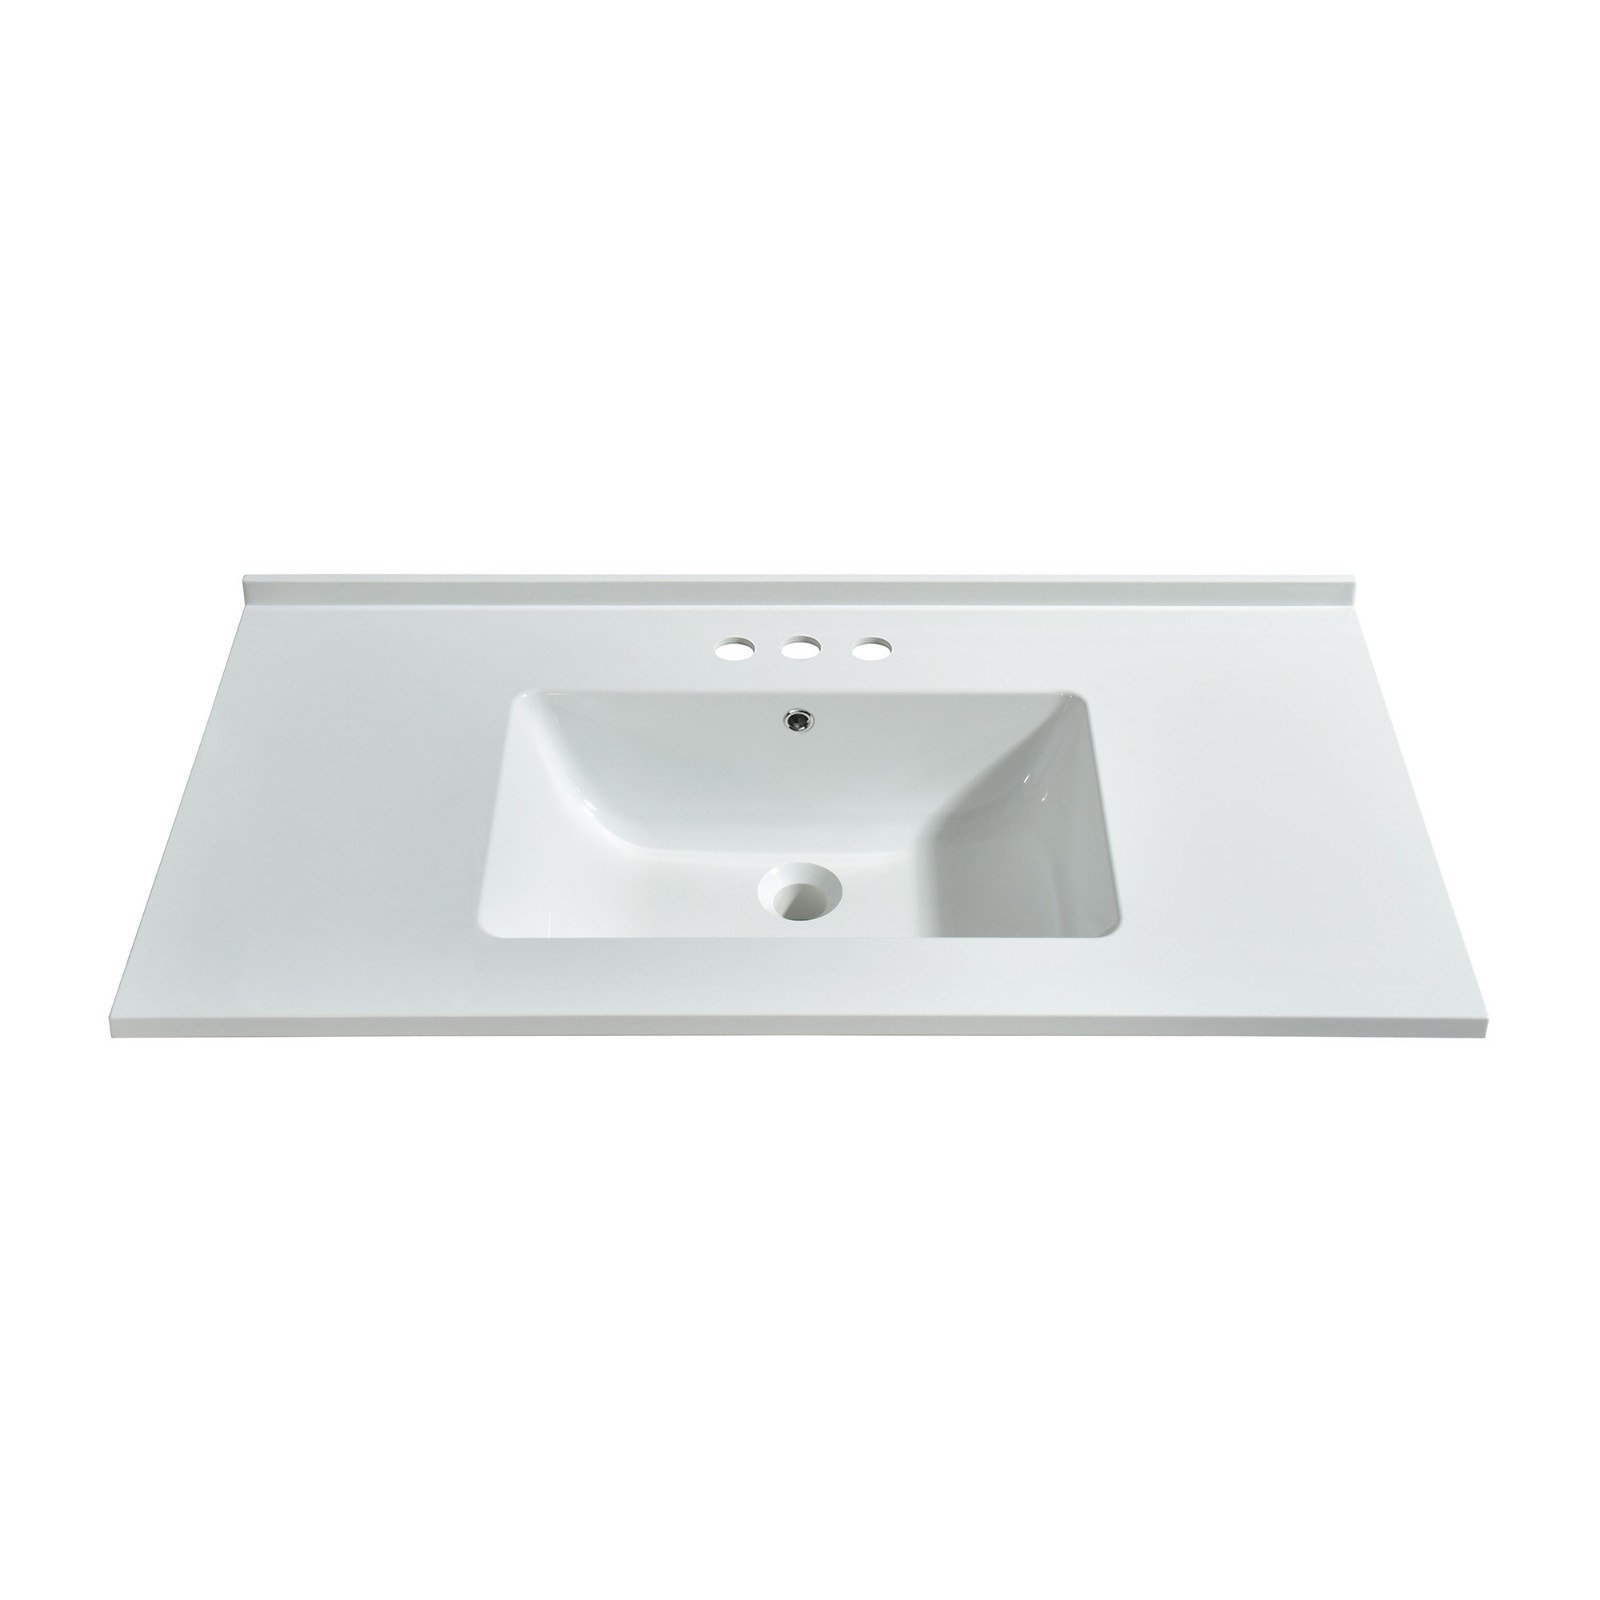  WOODBRIDGE VT3722-1008 Solid Surface Vanity Top with with Intergrated Sink and 3 Faucet Holes for 8 inch Widespread Faucet, 37